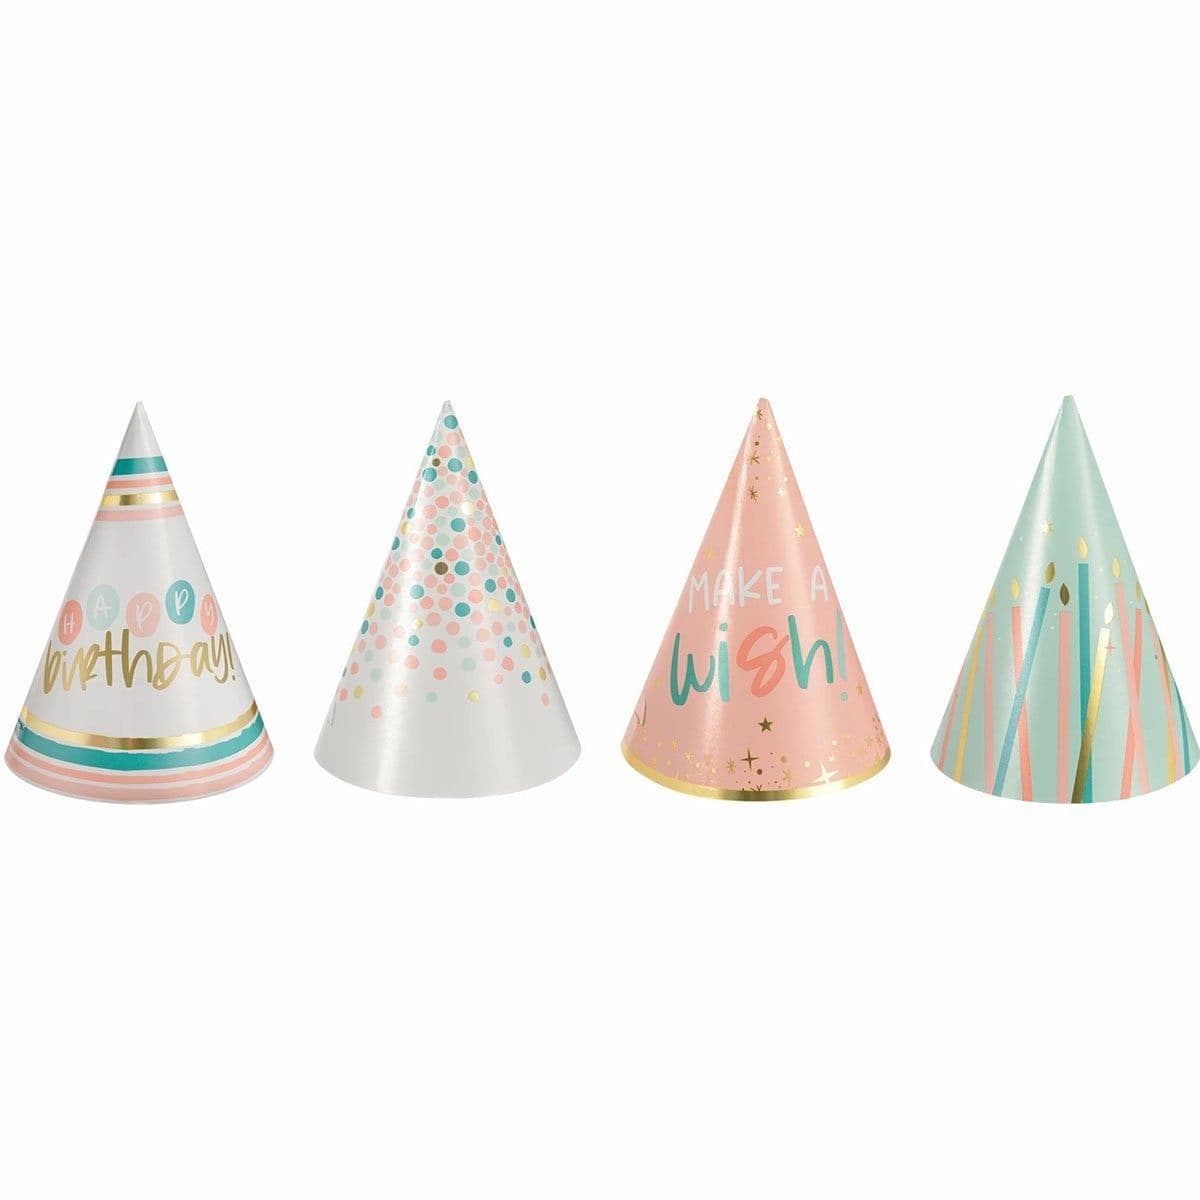 Buy General Birthday Happy Cake Day Mini Cone Hat, 12 Count sold at Party Expert